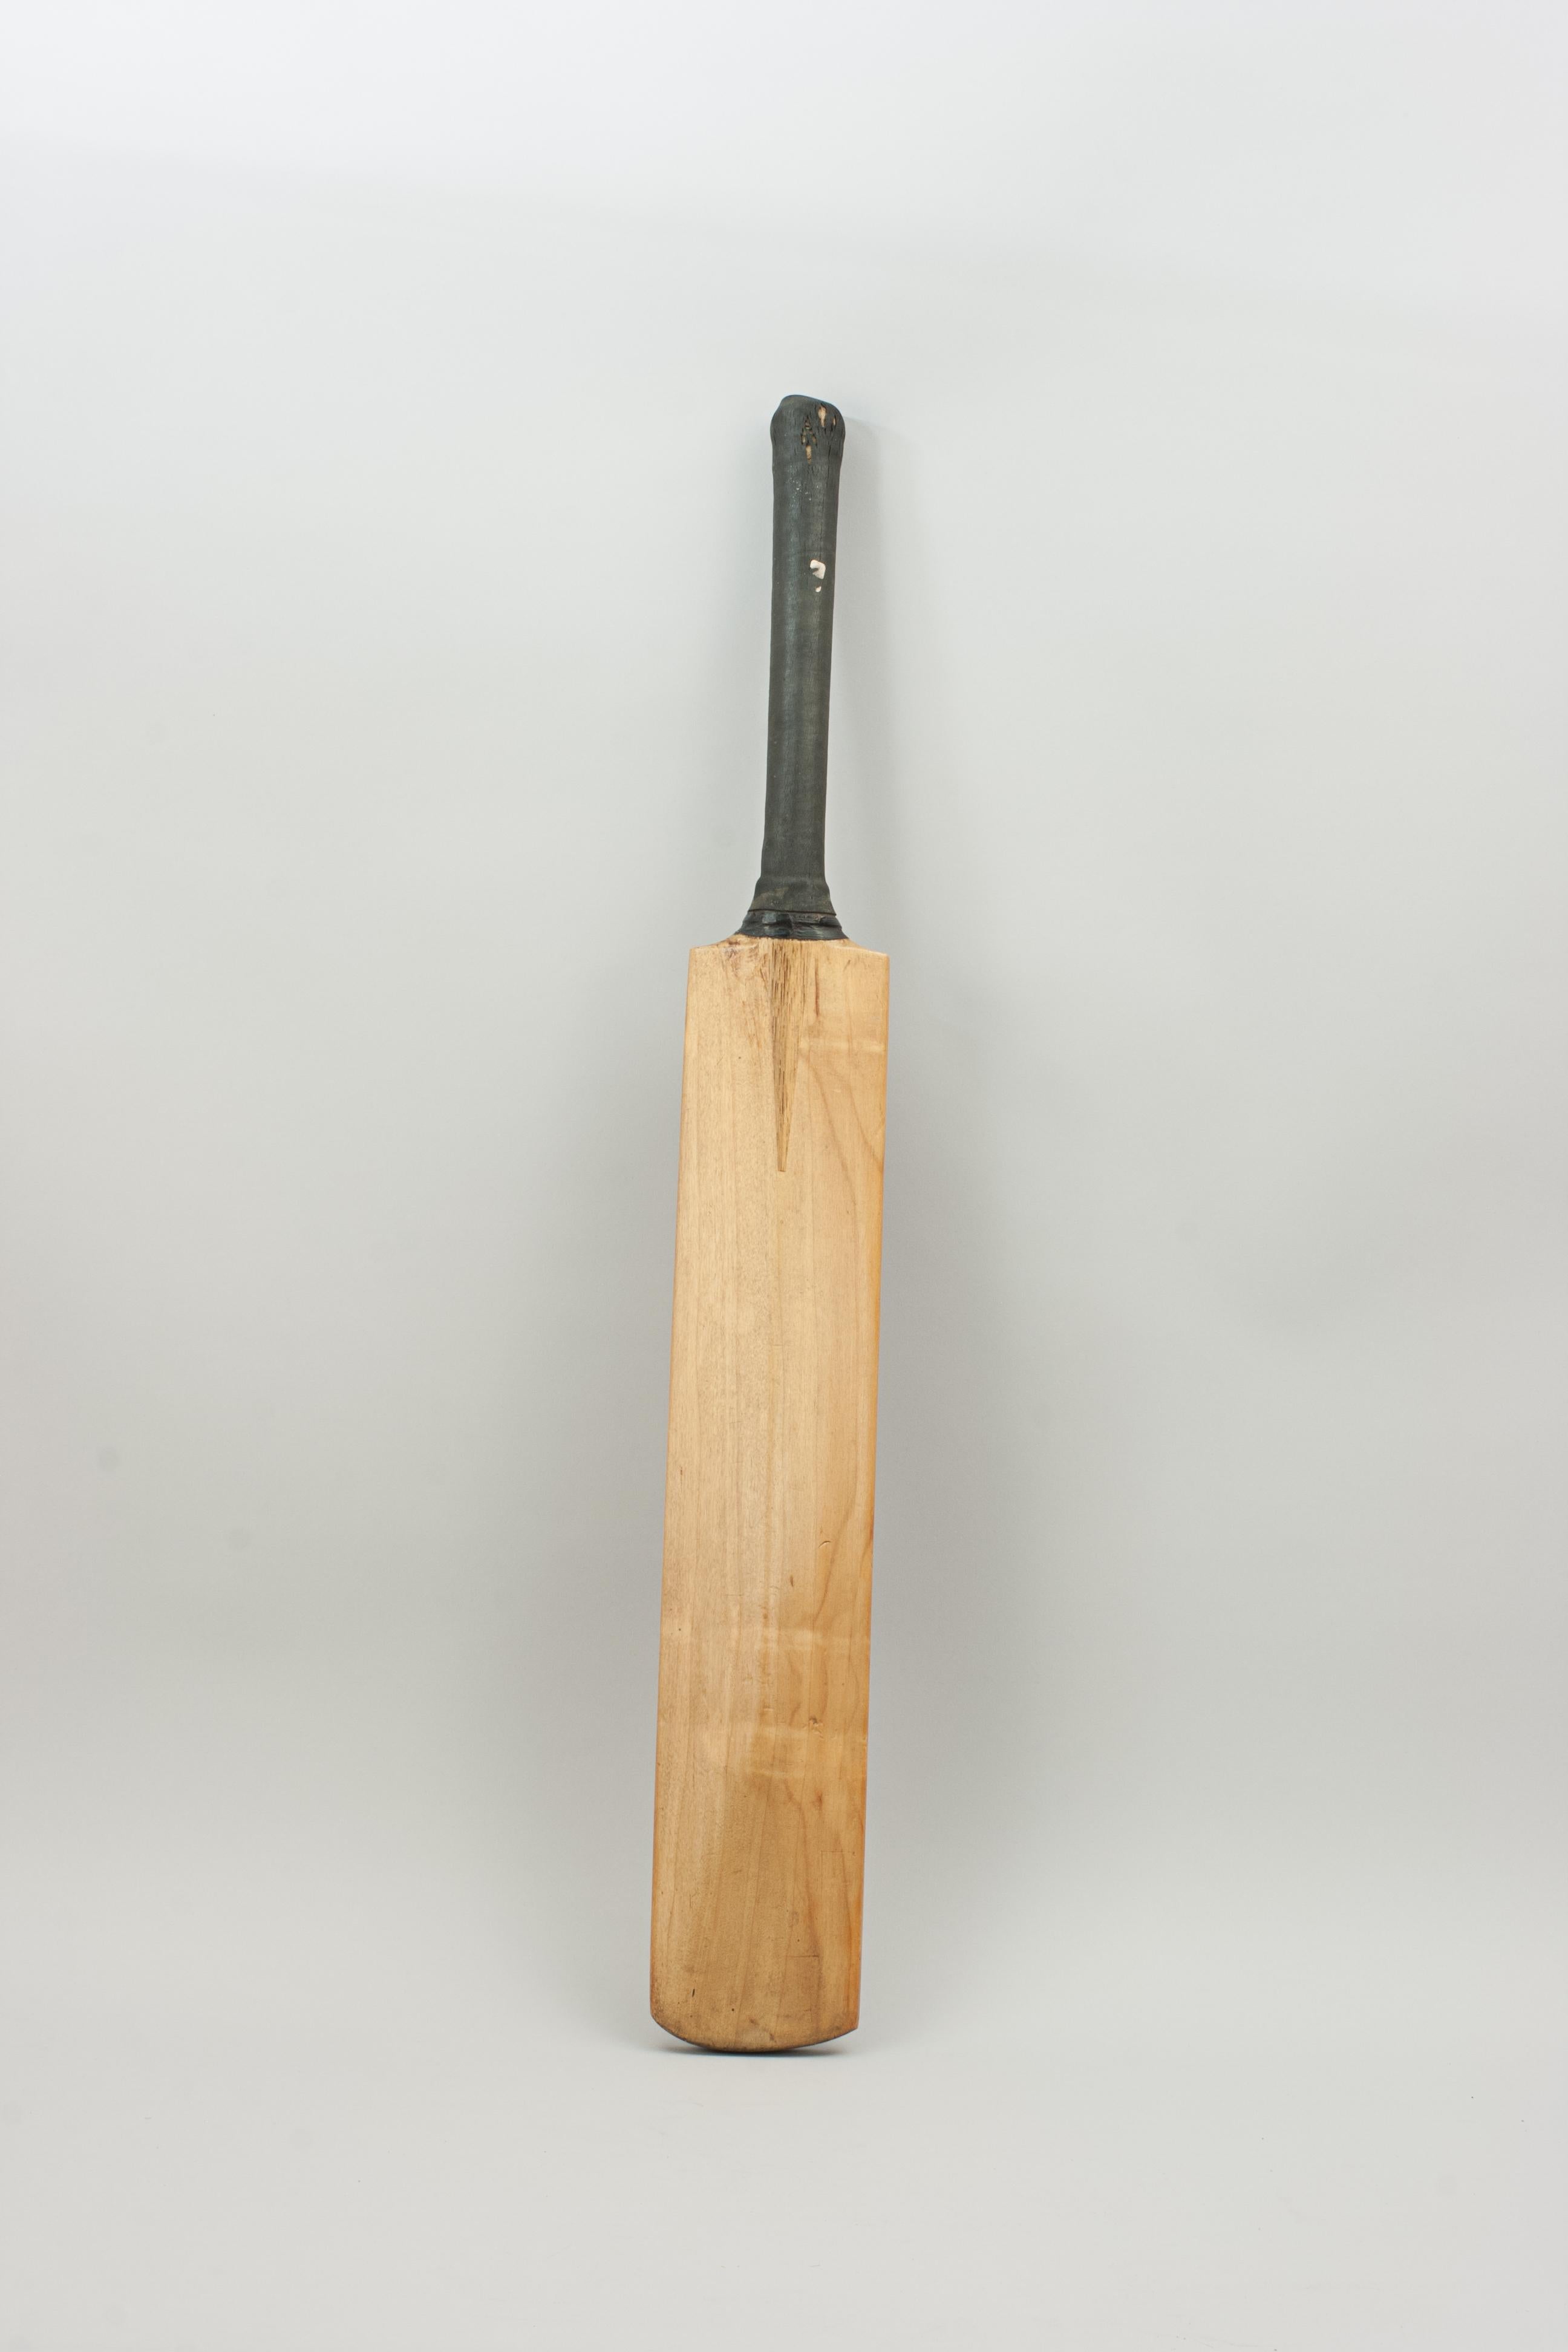 Vintage Ted Dexter cricket bat by Gray Nicolls.
A good clean willow cricket bat, marked on the face 'Ted Dexter, Autograph' with 'Gray Nicolls' on both shoulders. A nice clean bat with a rubber grip.

Taken from Ted Dexter website:

Edward